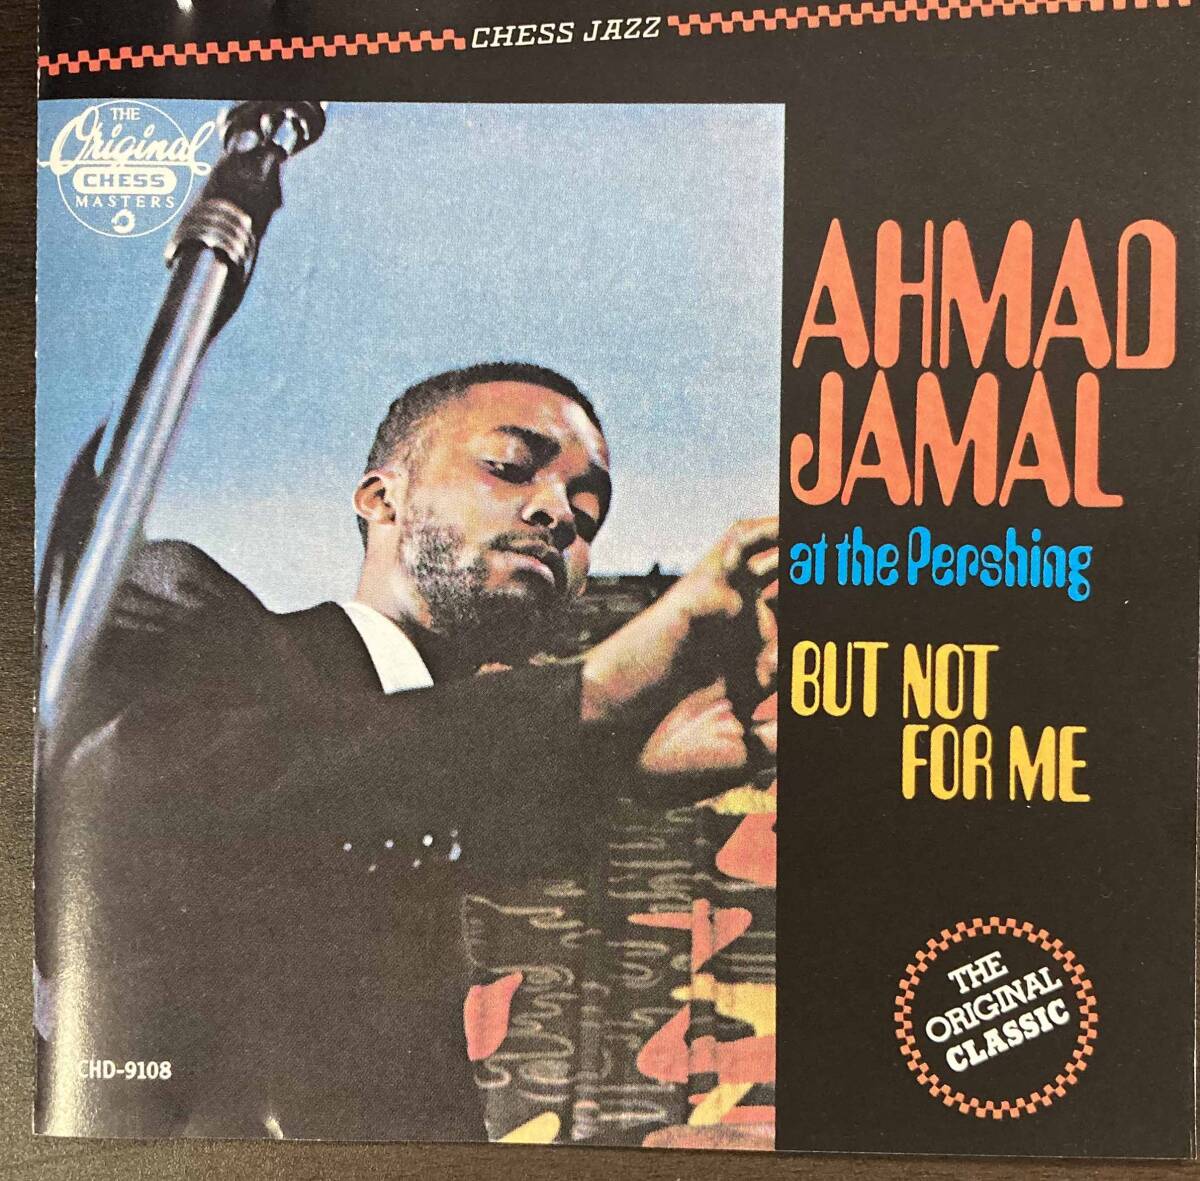 Ahmad Jamal / But not for me 中古CD 輸入盤の画像1